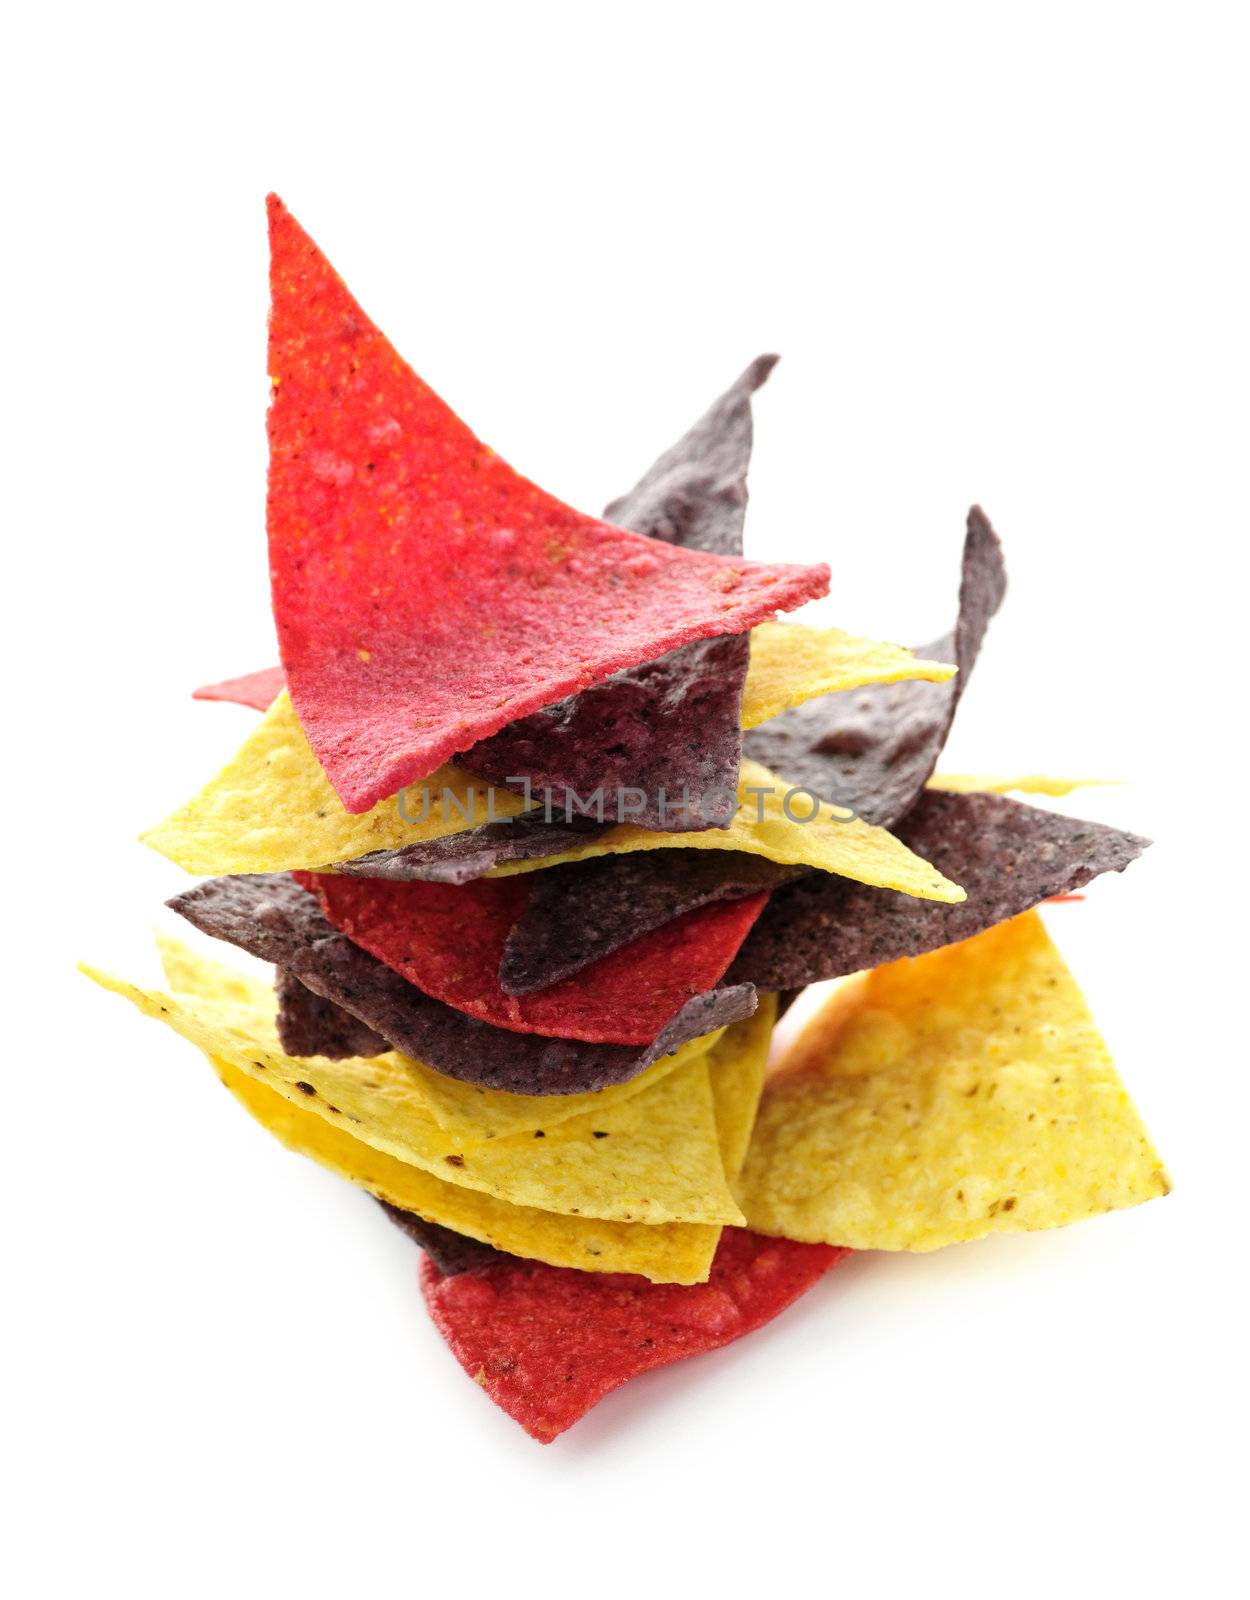 Tortilla chips by elenathewise